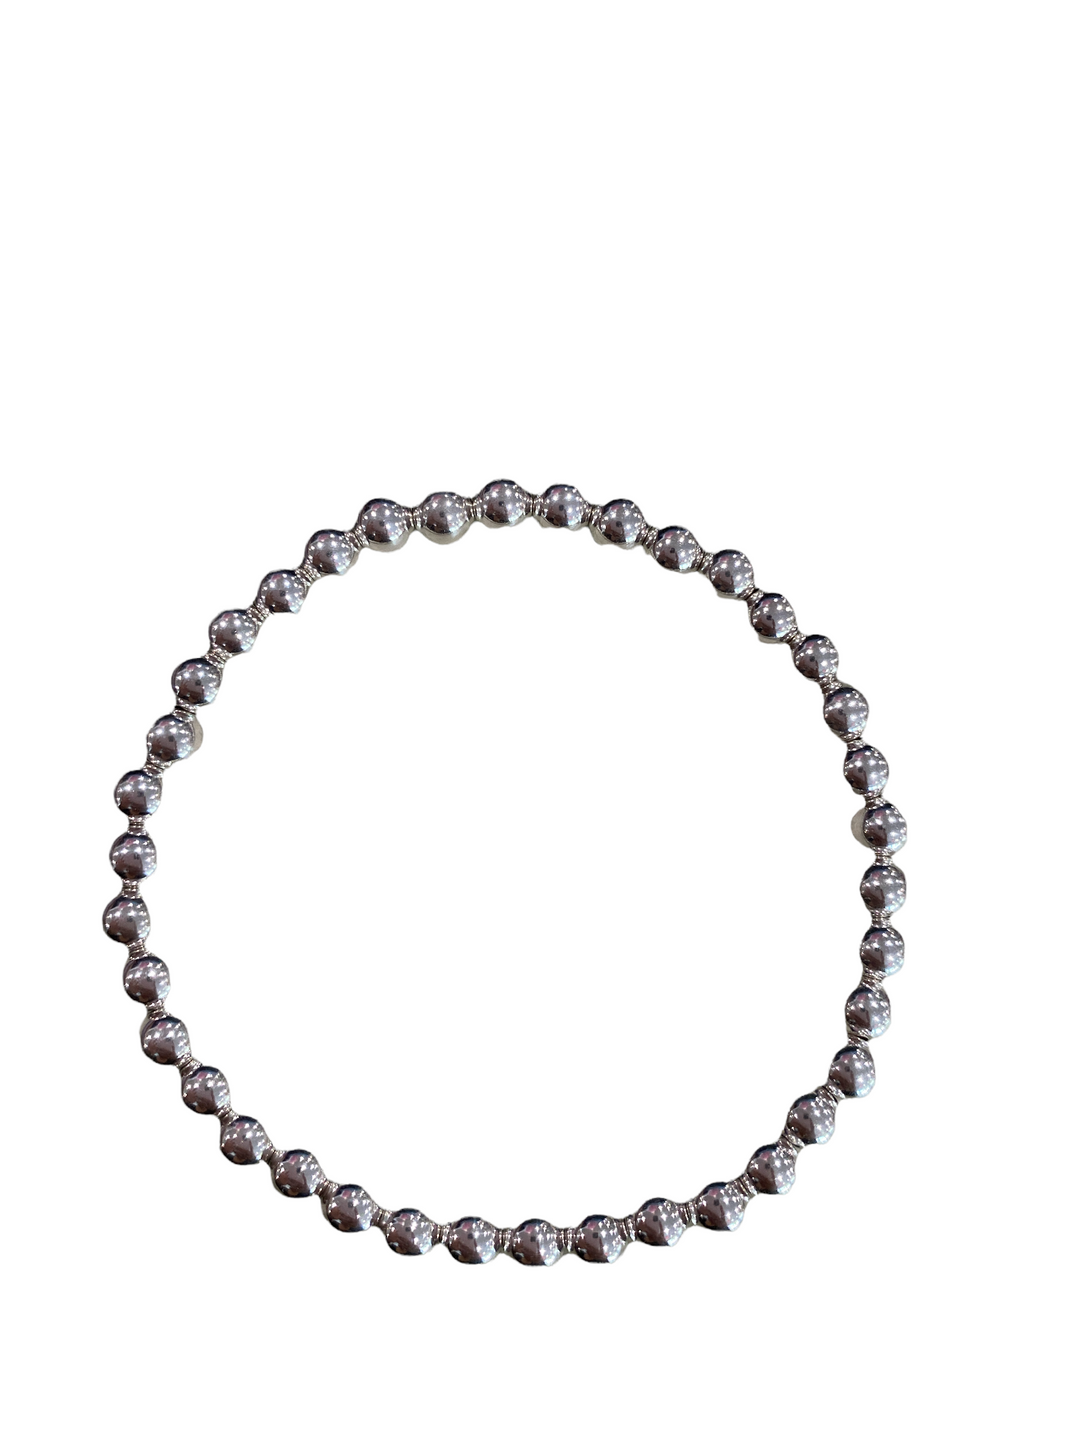 SILVER 5mm CLASSIC BEAD BRACELET - Kingfisher Road - Online Boutique